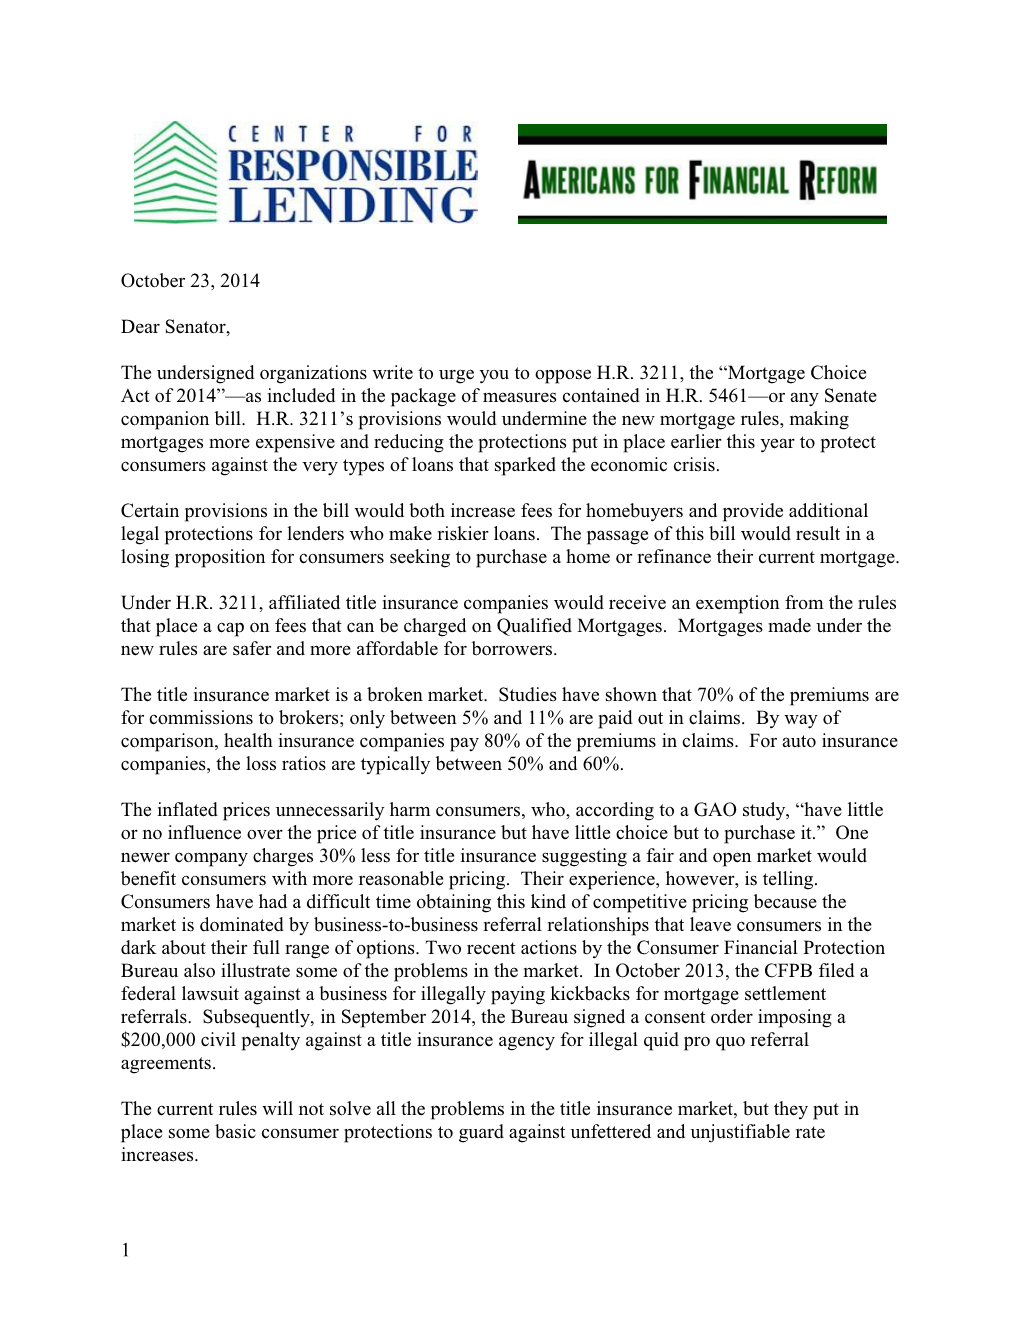 The Undersigned Organizations Write to Urge You to Oppose H.R. 3211, the Mortgage Choice